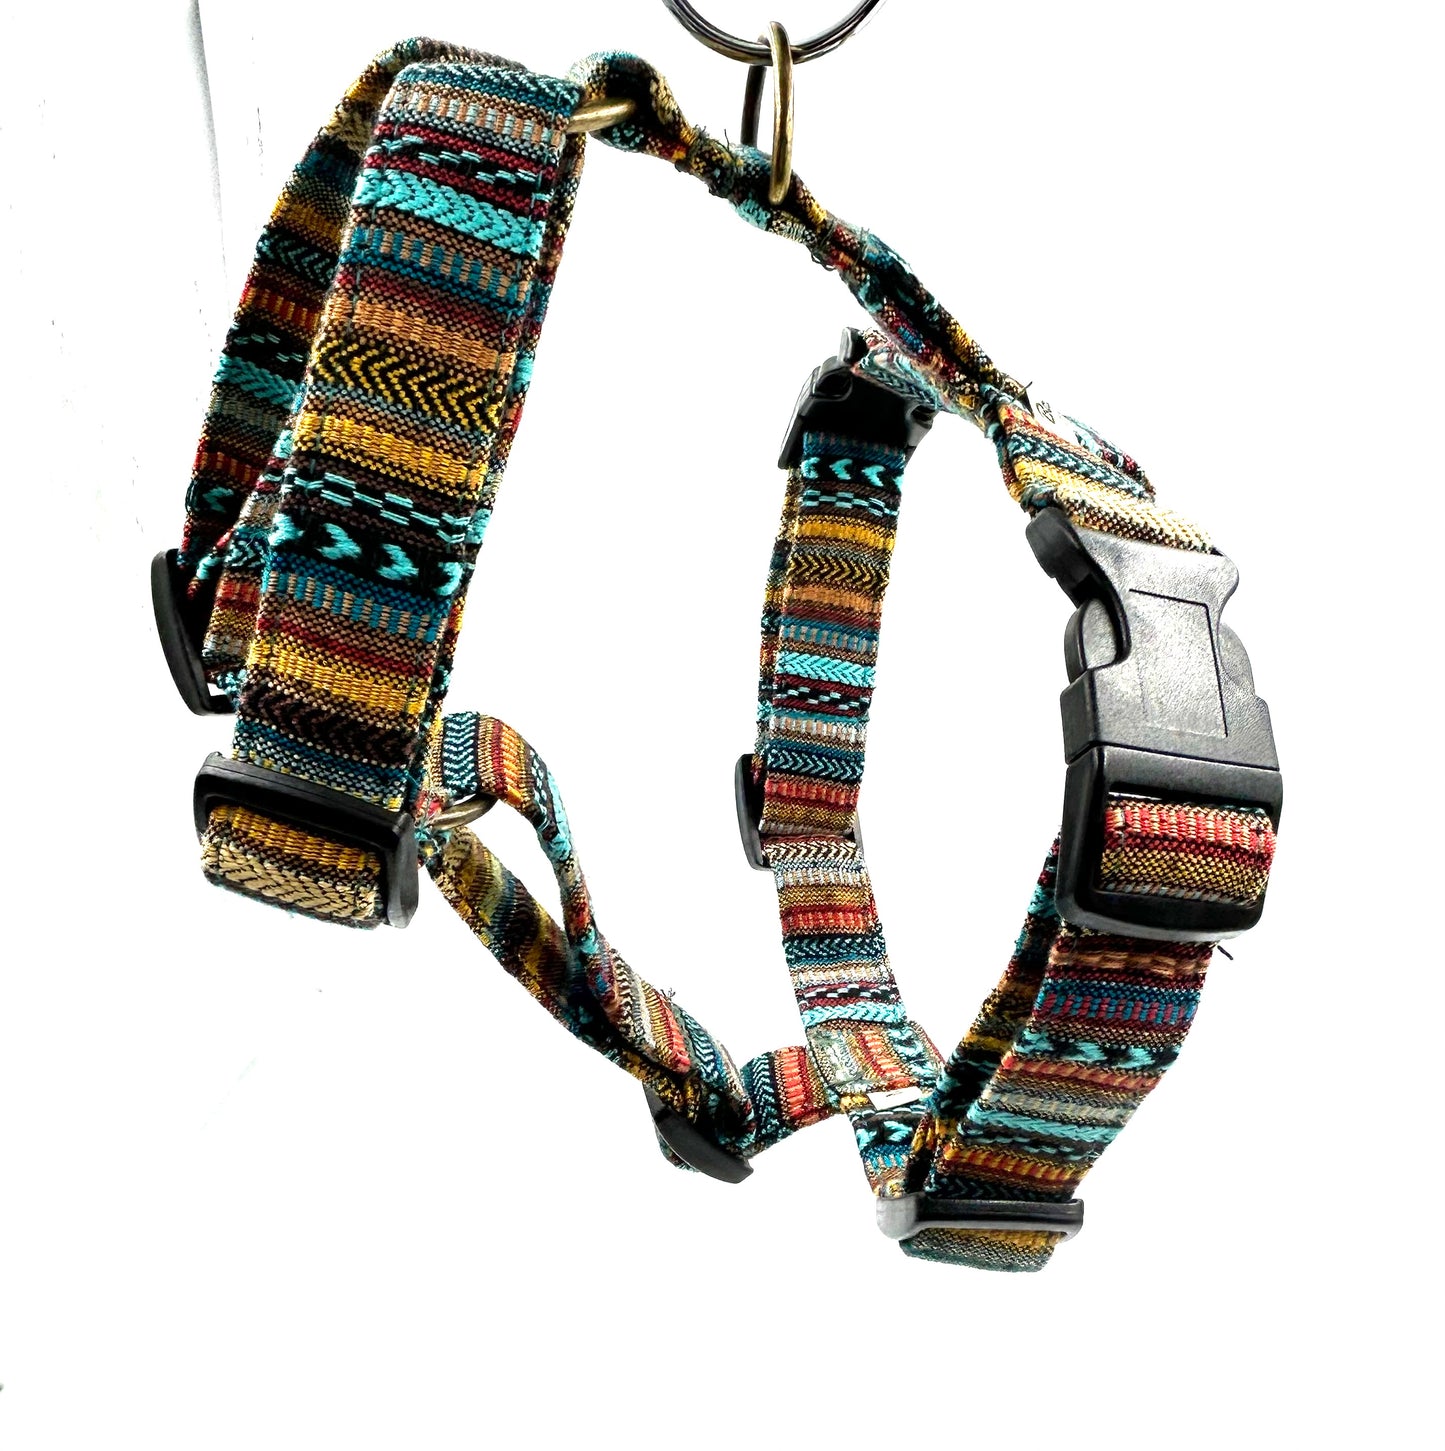 Dreamcoat Strap Harness